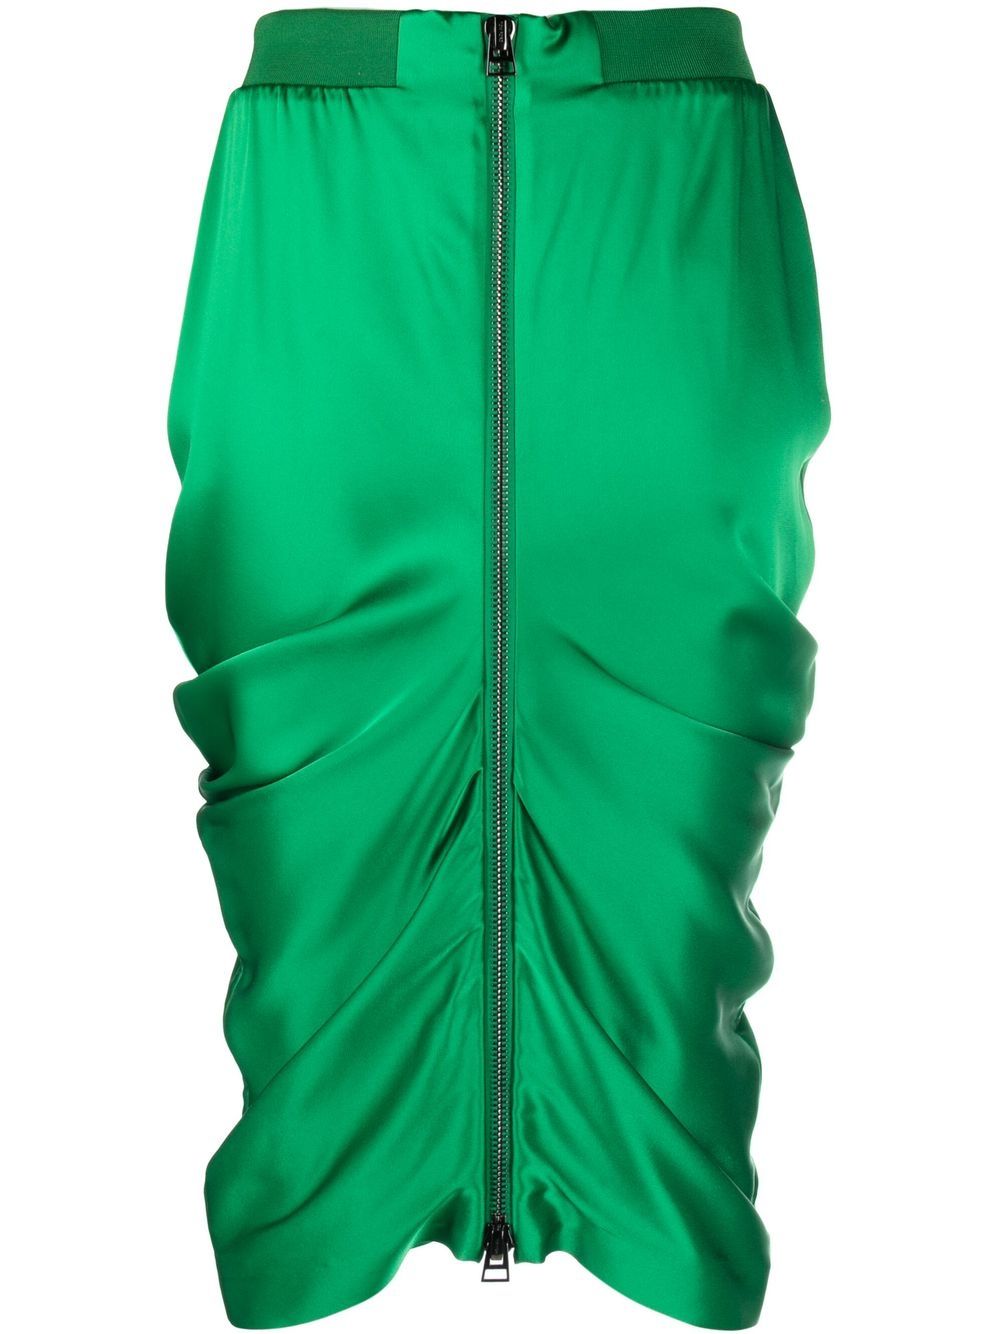 TOM FORD zip-up draped pencil skirt - Green von TOM FORD